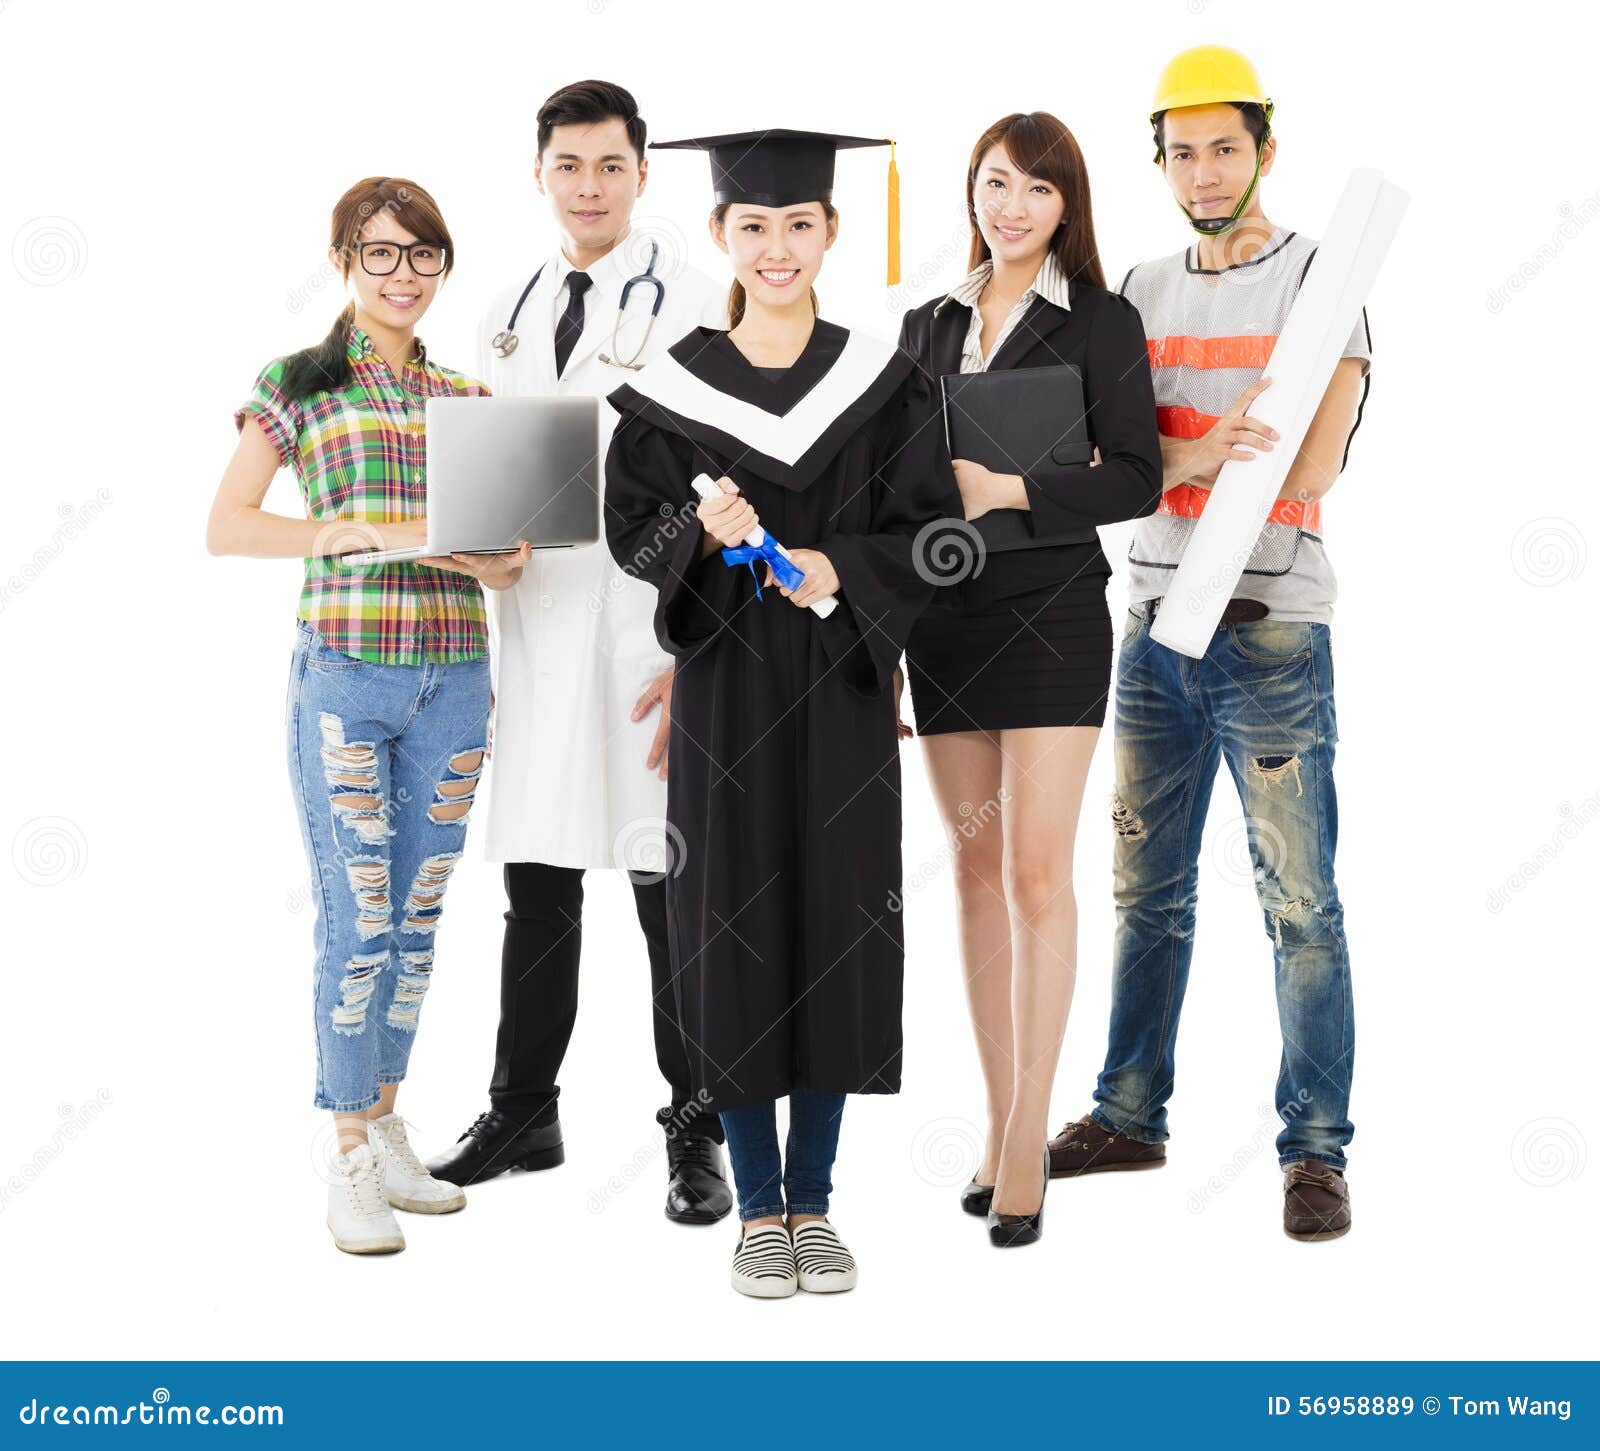 people in different occupations with graduation